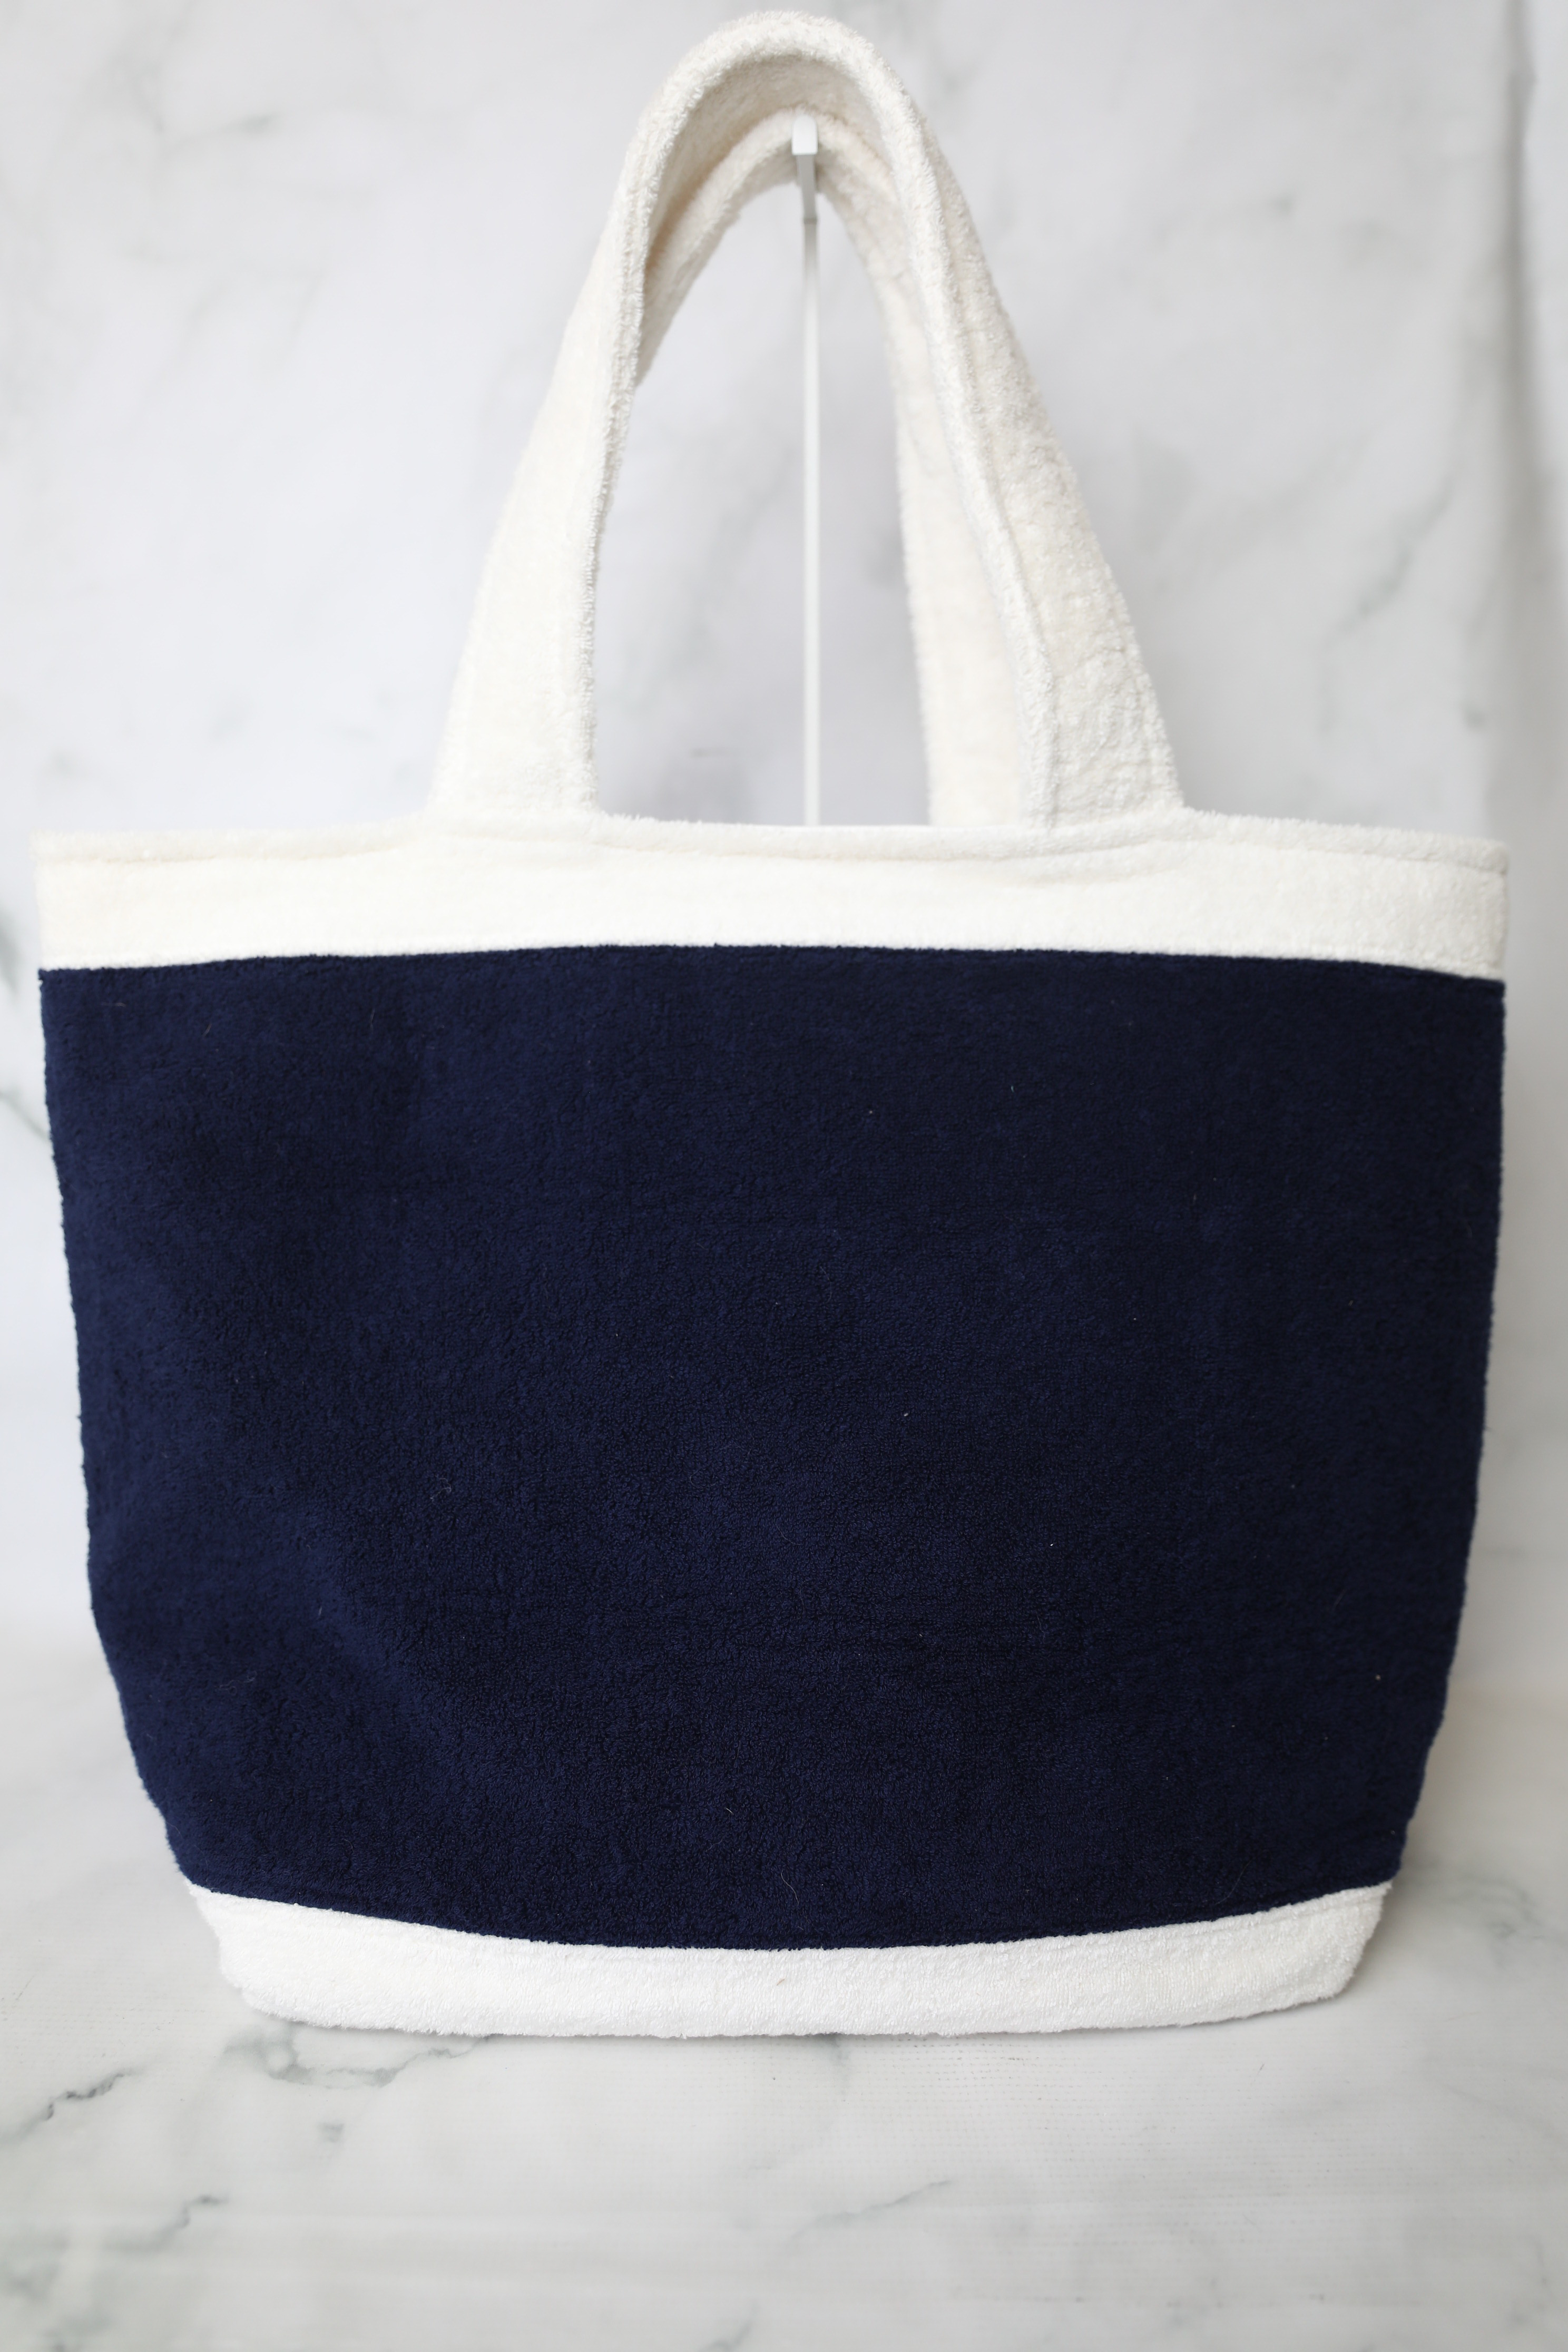 Chanel Terry Beach Tote With Towel, White and Navy Terry Fabric, New In  Dustbag WA001 - Julia Rose Boston